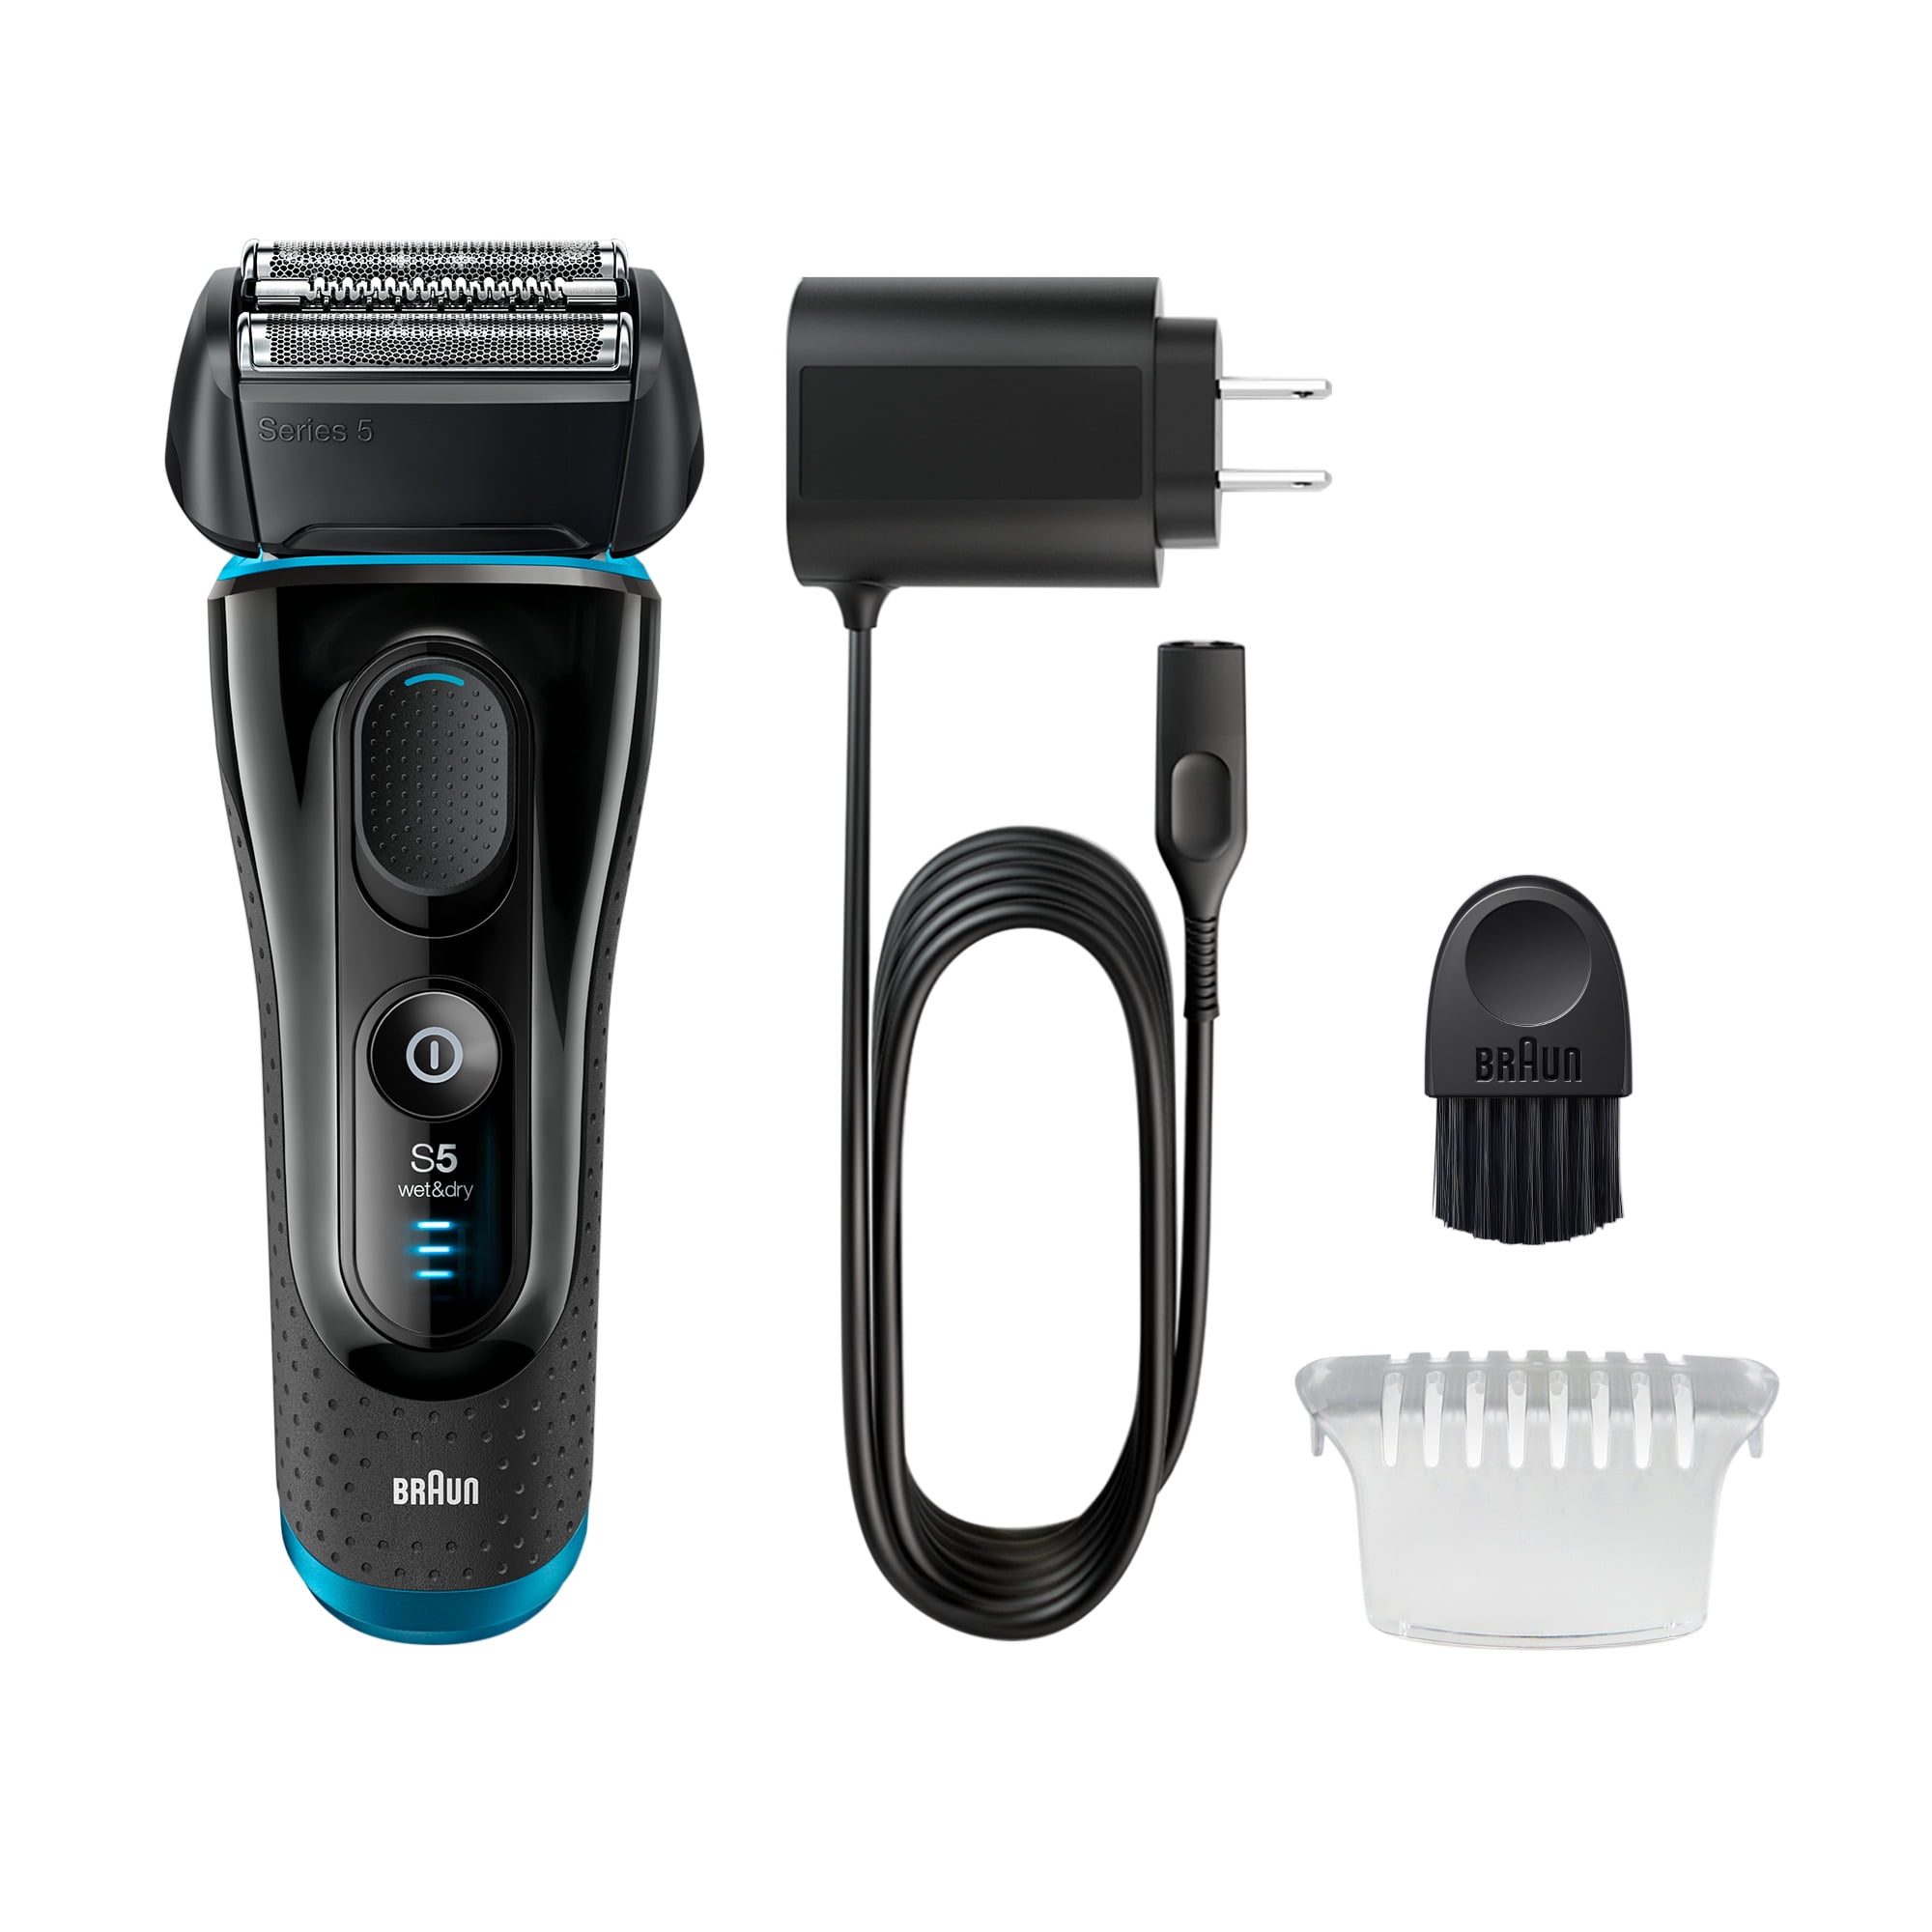 5140s Wet 5 Rechargeable Series and Cordless Men\'s Electric Pop Trimmer, Braun Up Razor Dry, Precision Foil Shaver, and